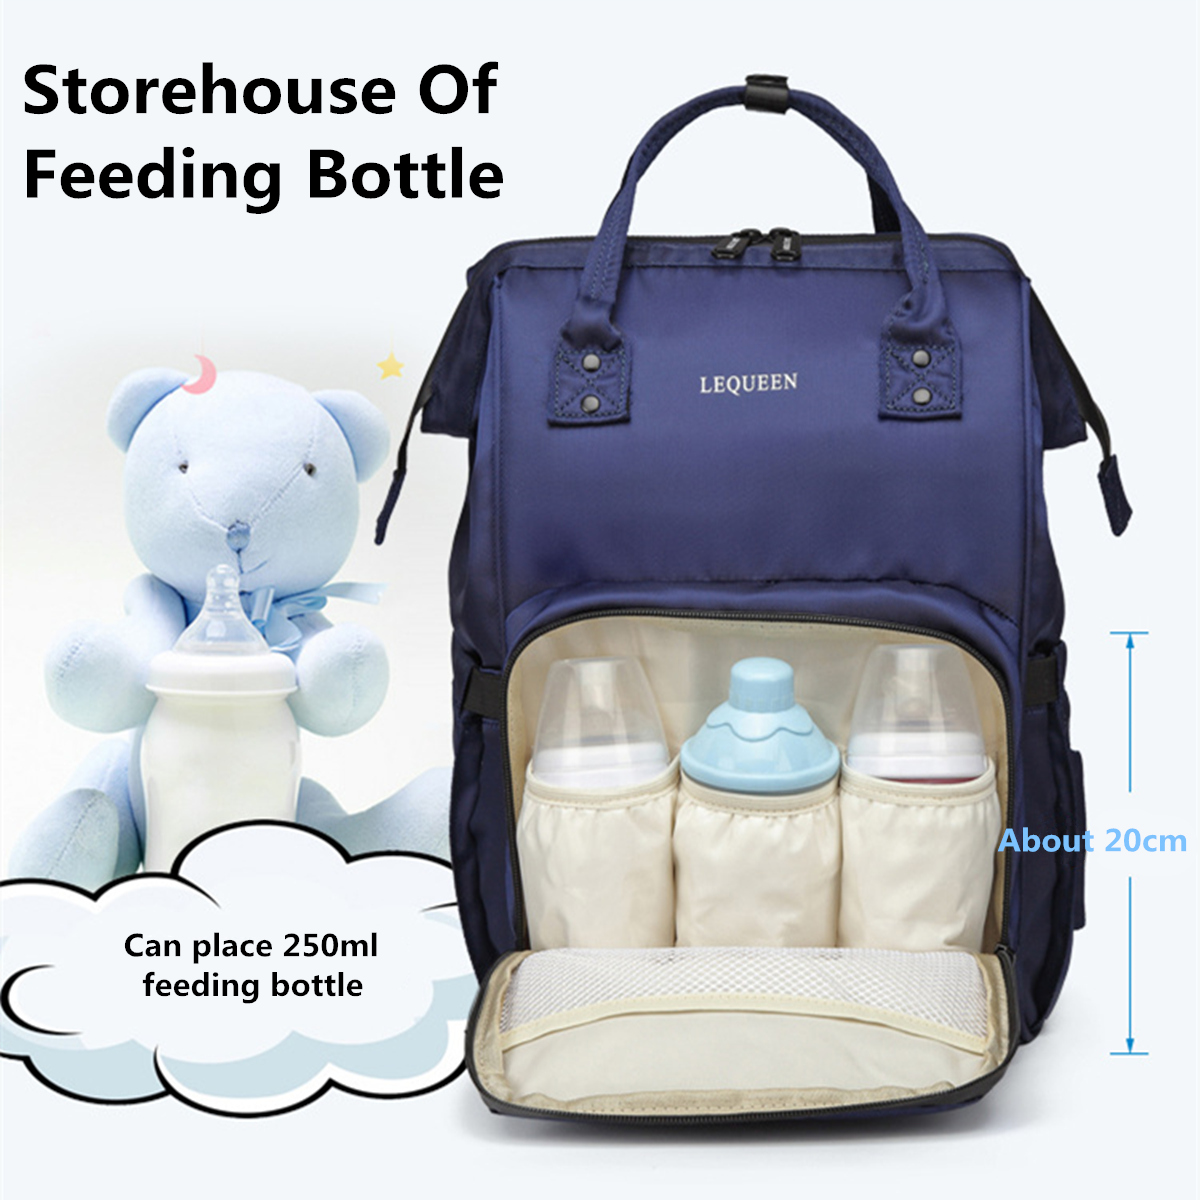 16L-Outdoor-Travel-Mummy-Backpack-Rucksack-Large-Capacity-Baby-Nappy-Diapers-Storage-Bag-1414600-2